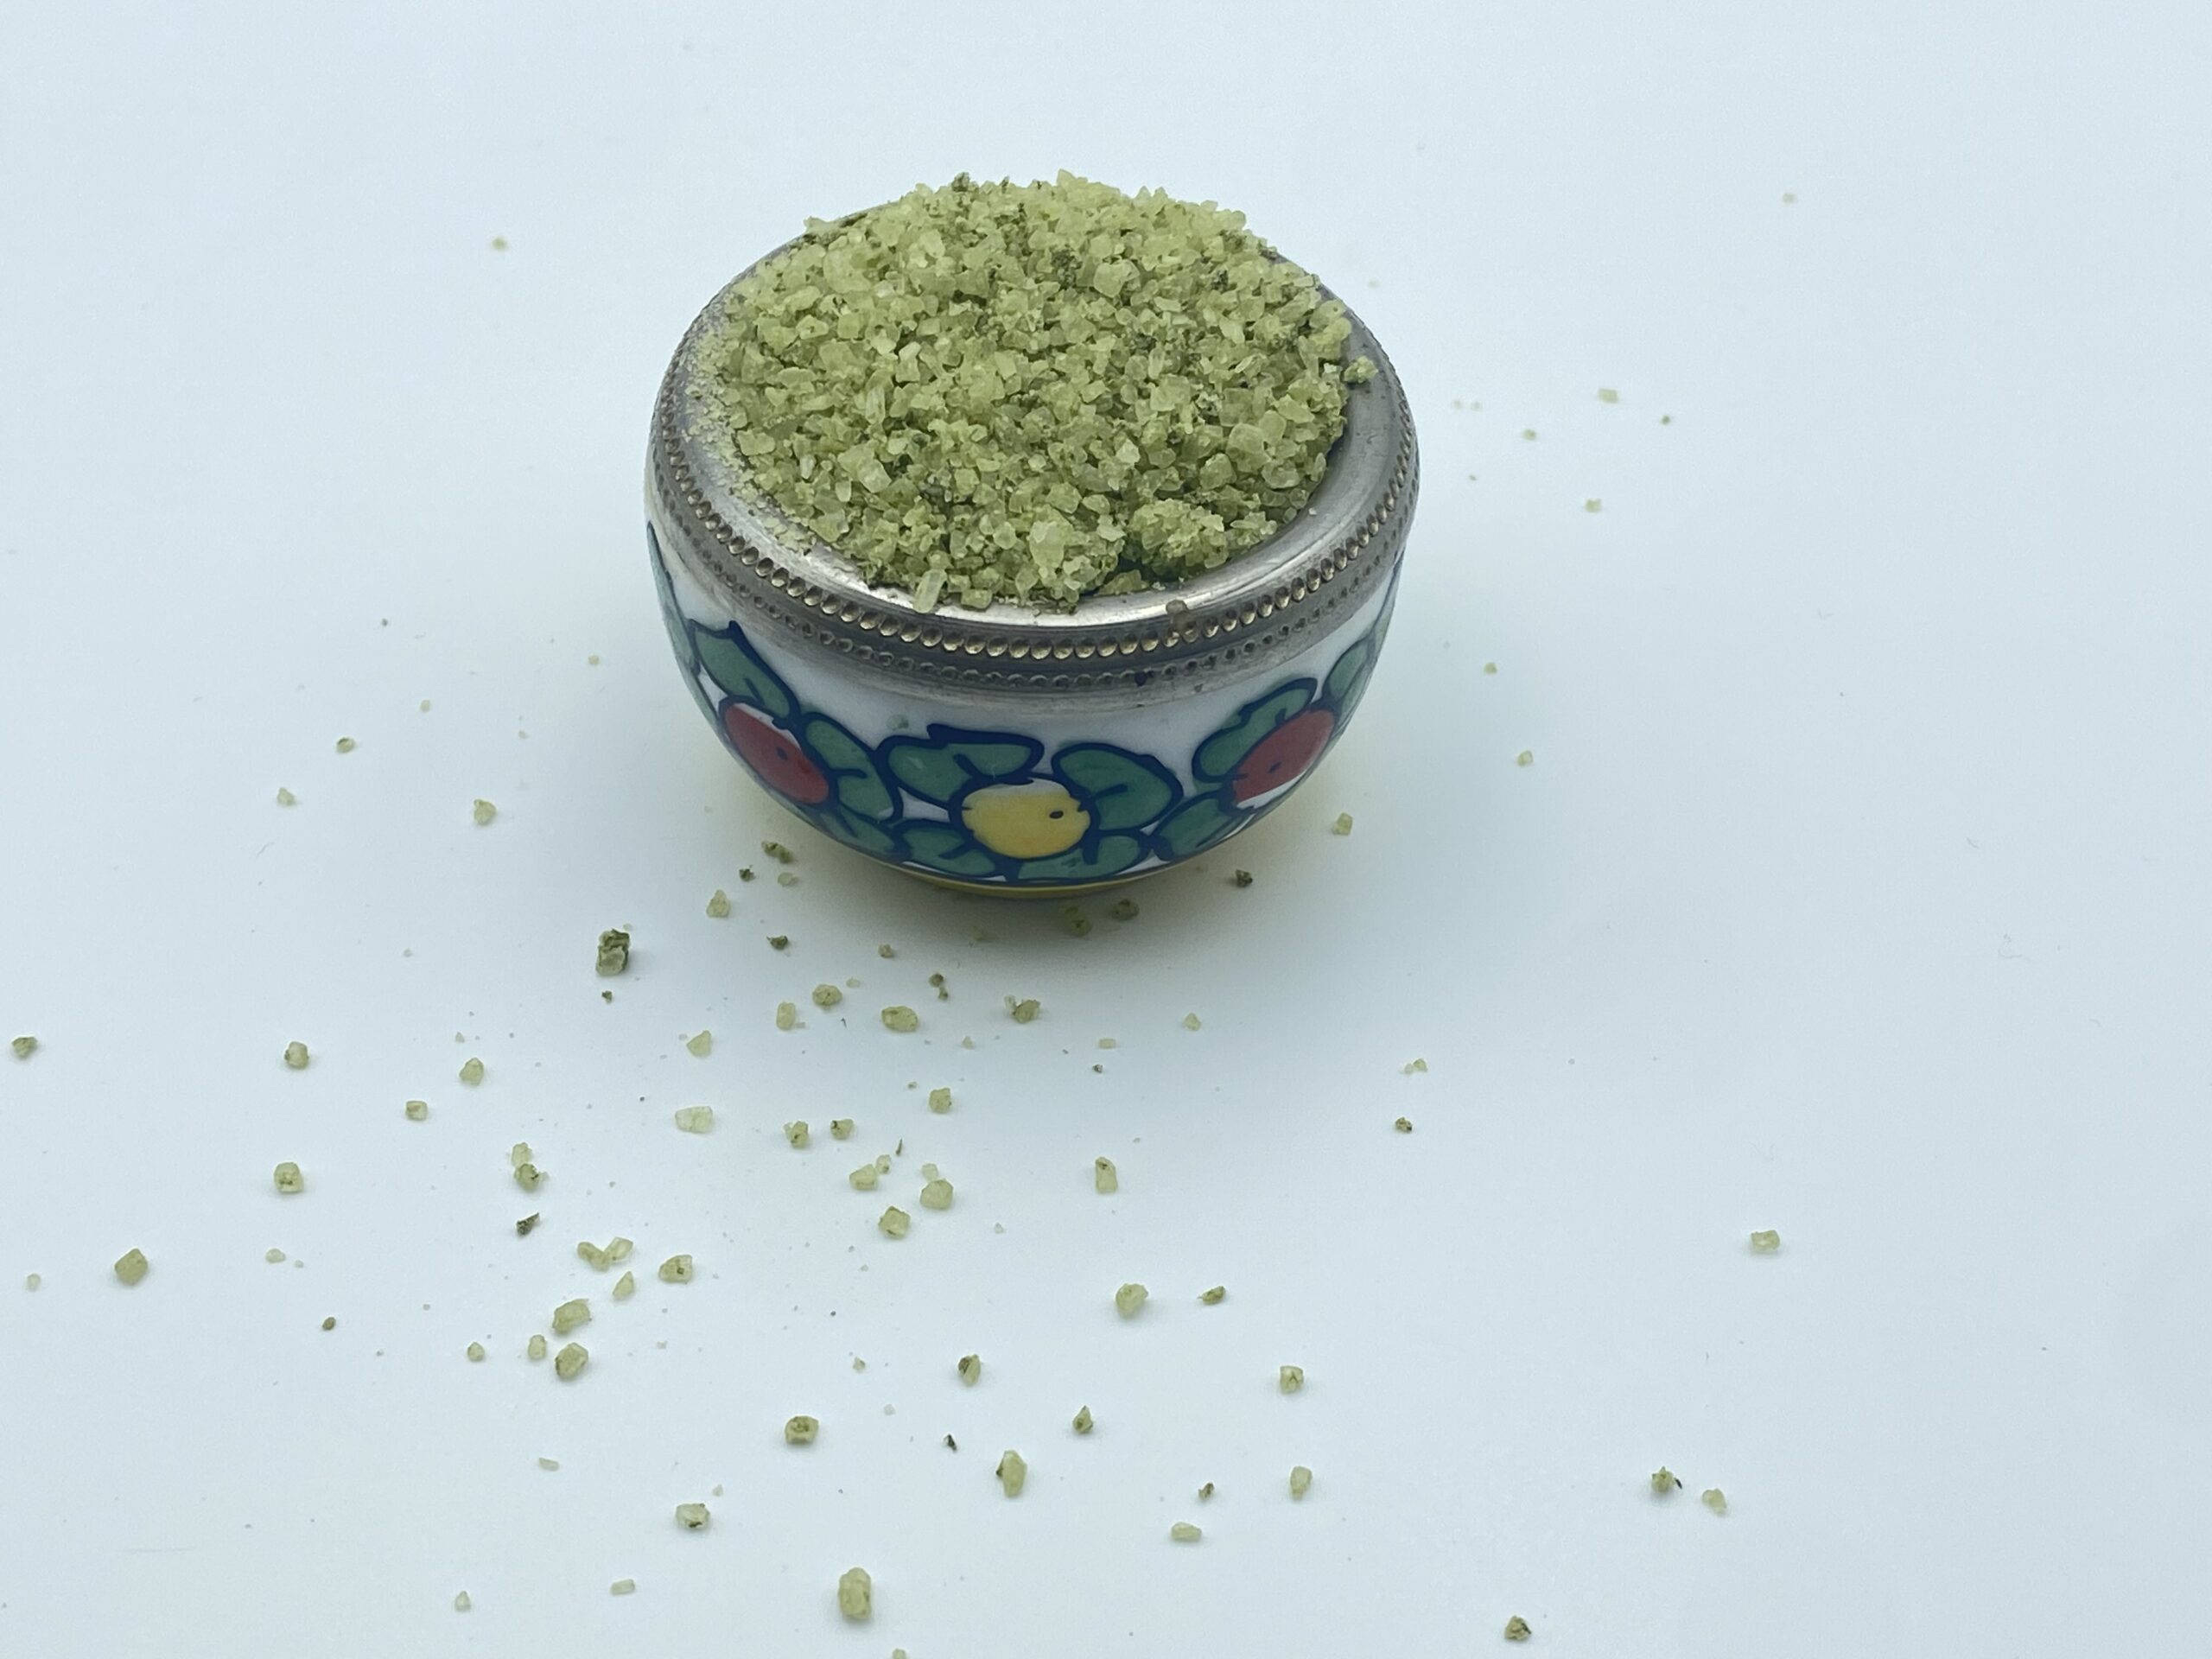 Herb salt in a small bowl with flowers painted on the sides